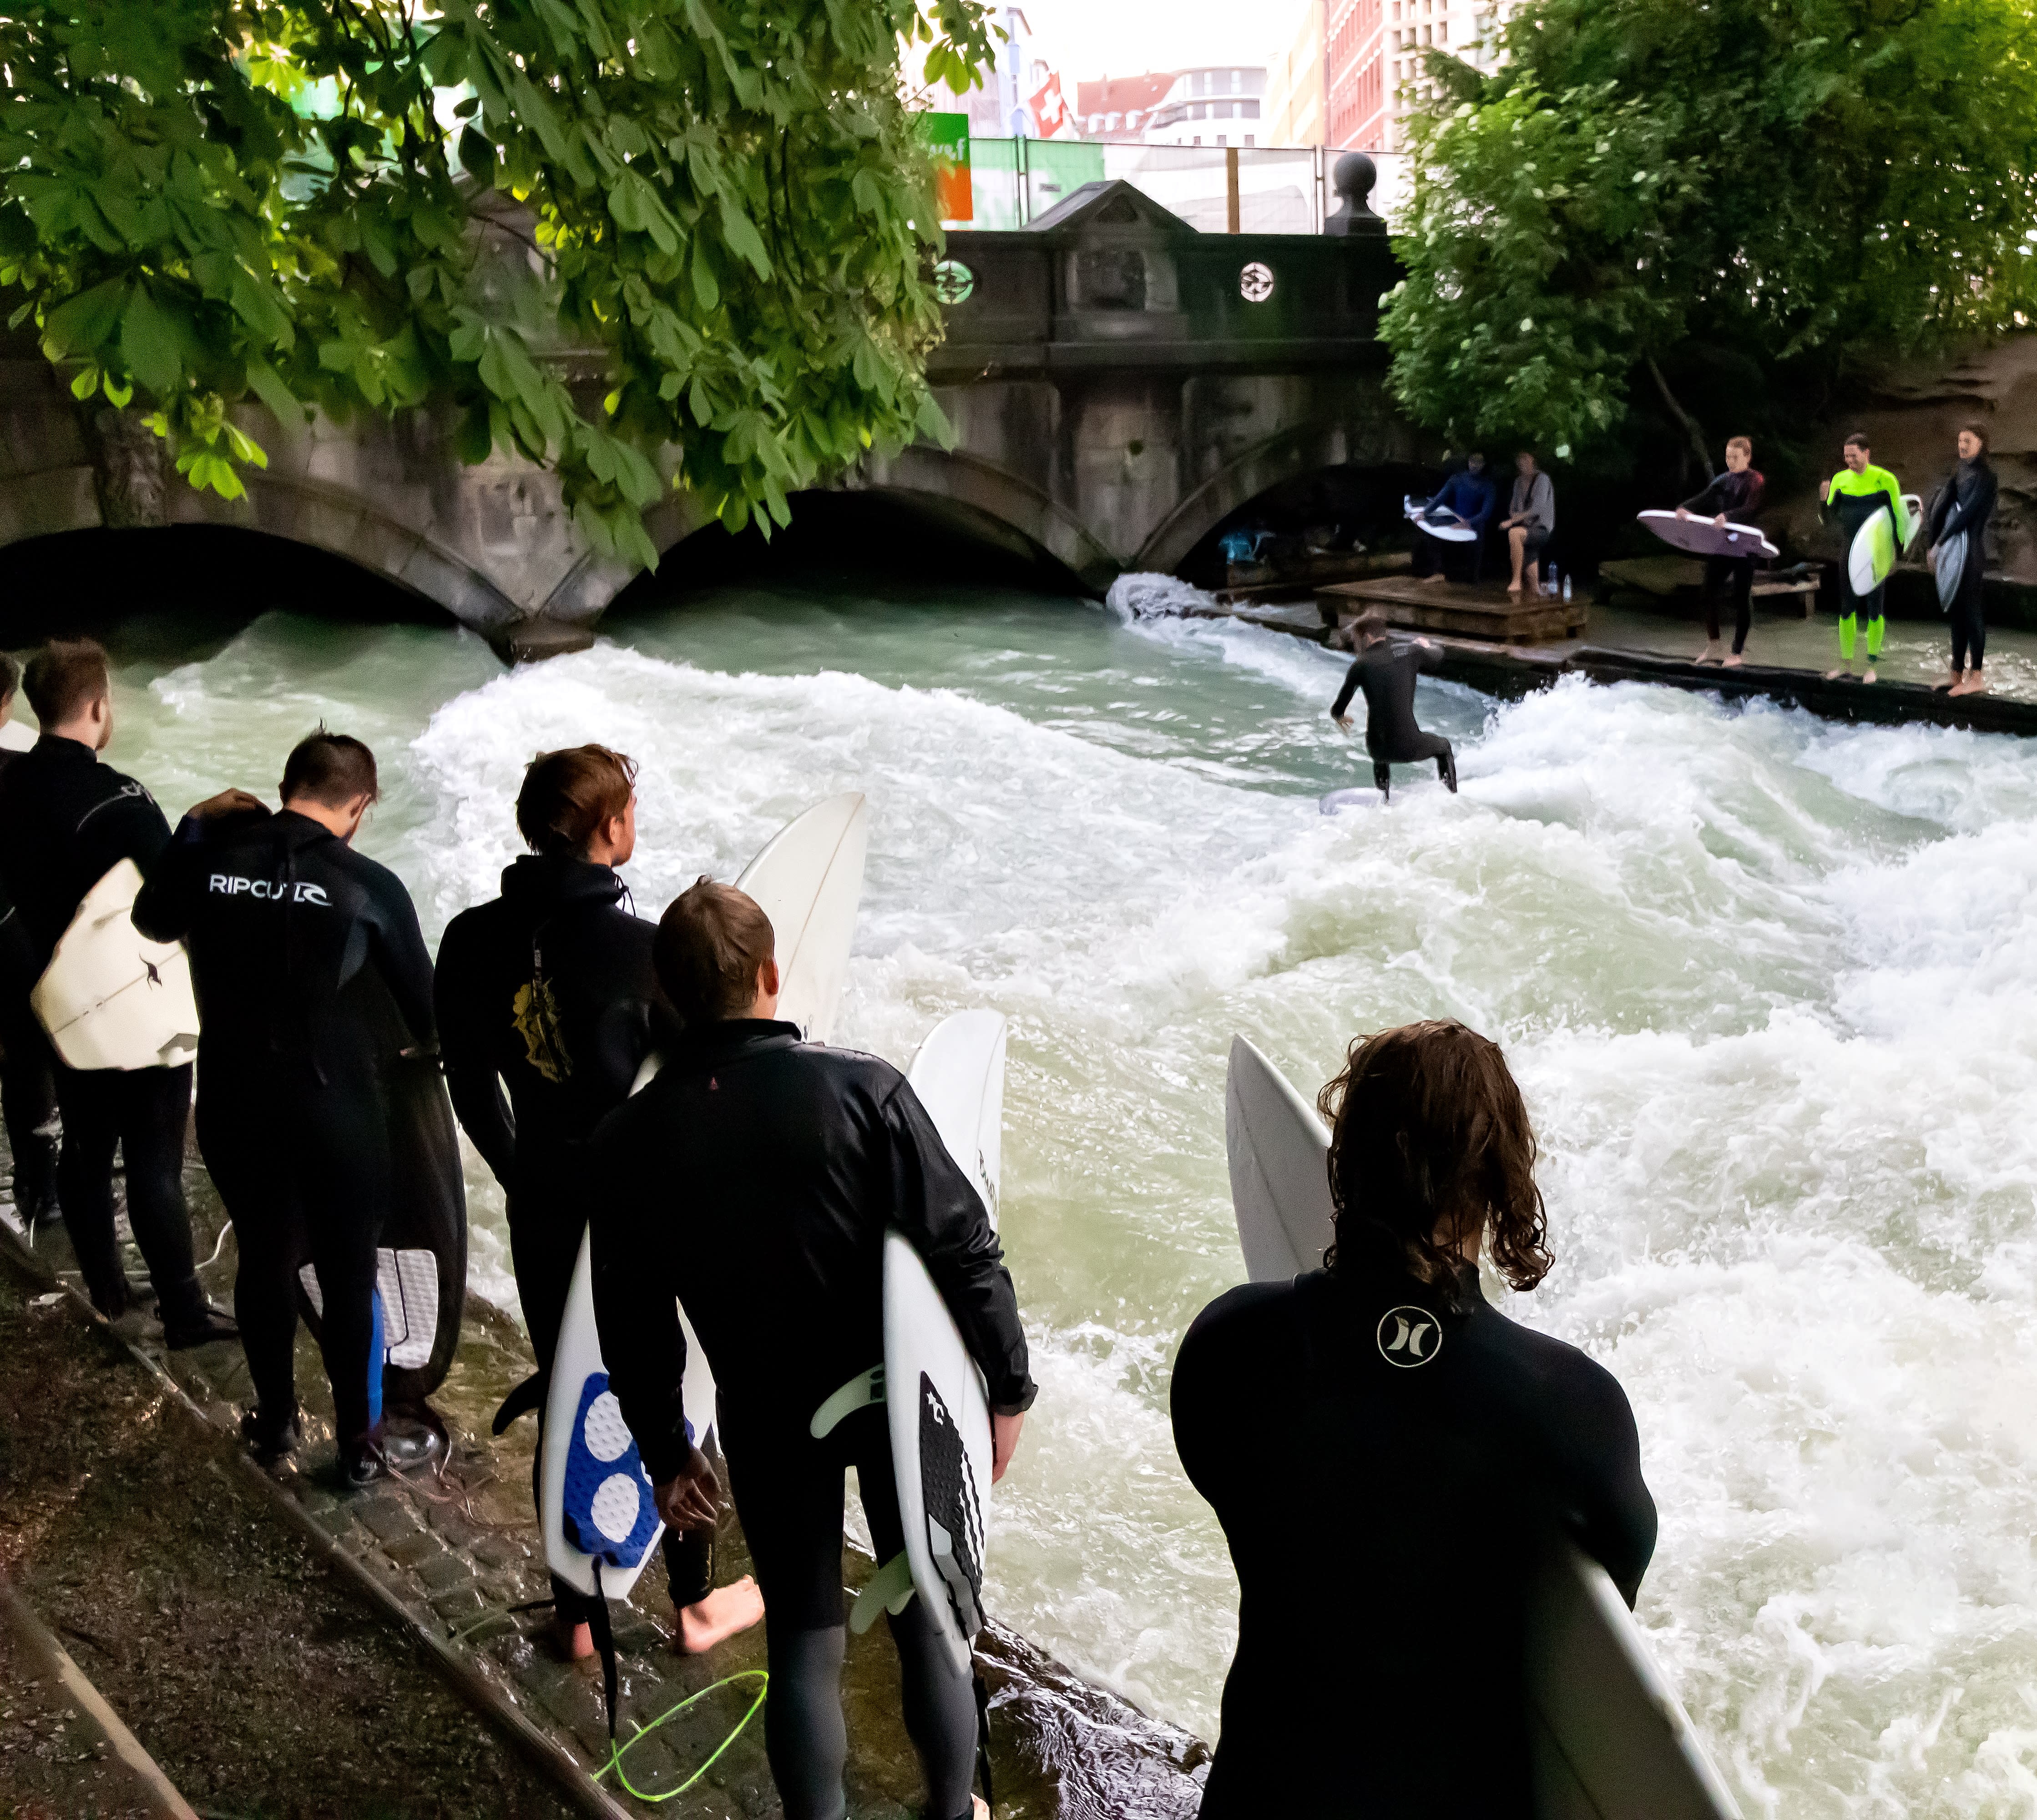 Surfers in Munich? Yes! Surfing waves on the Eisbach river at the entrance of the Englischer Garten.